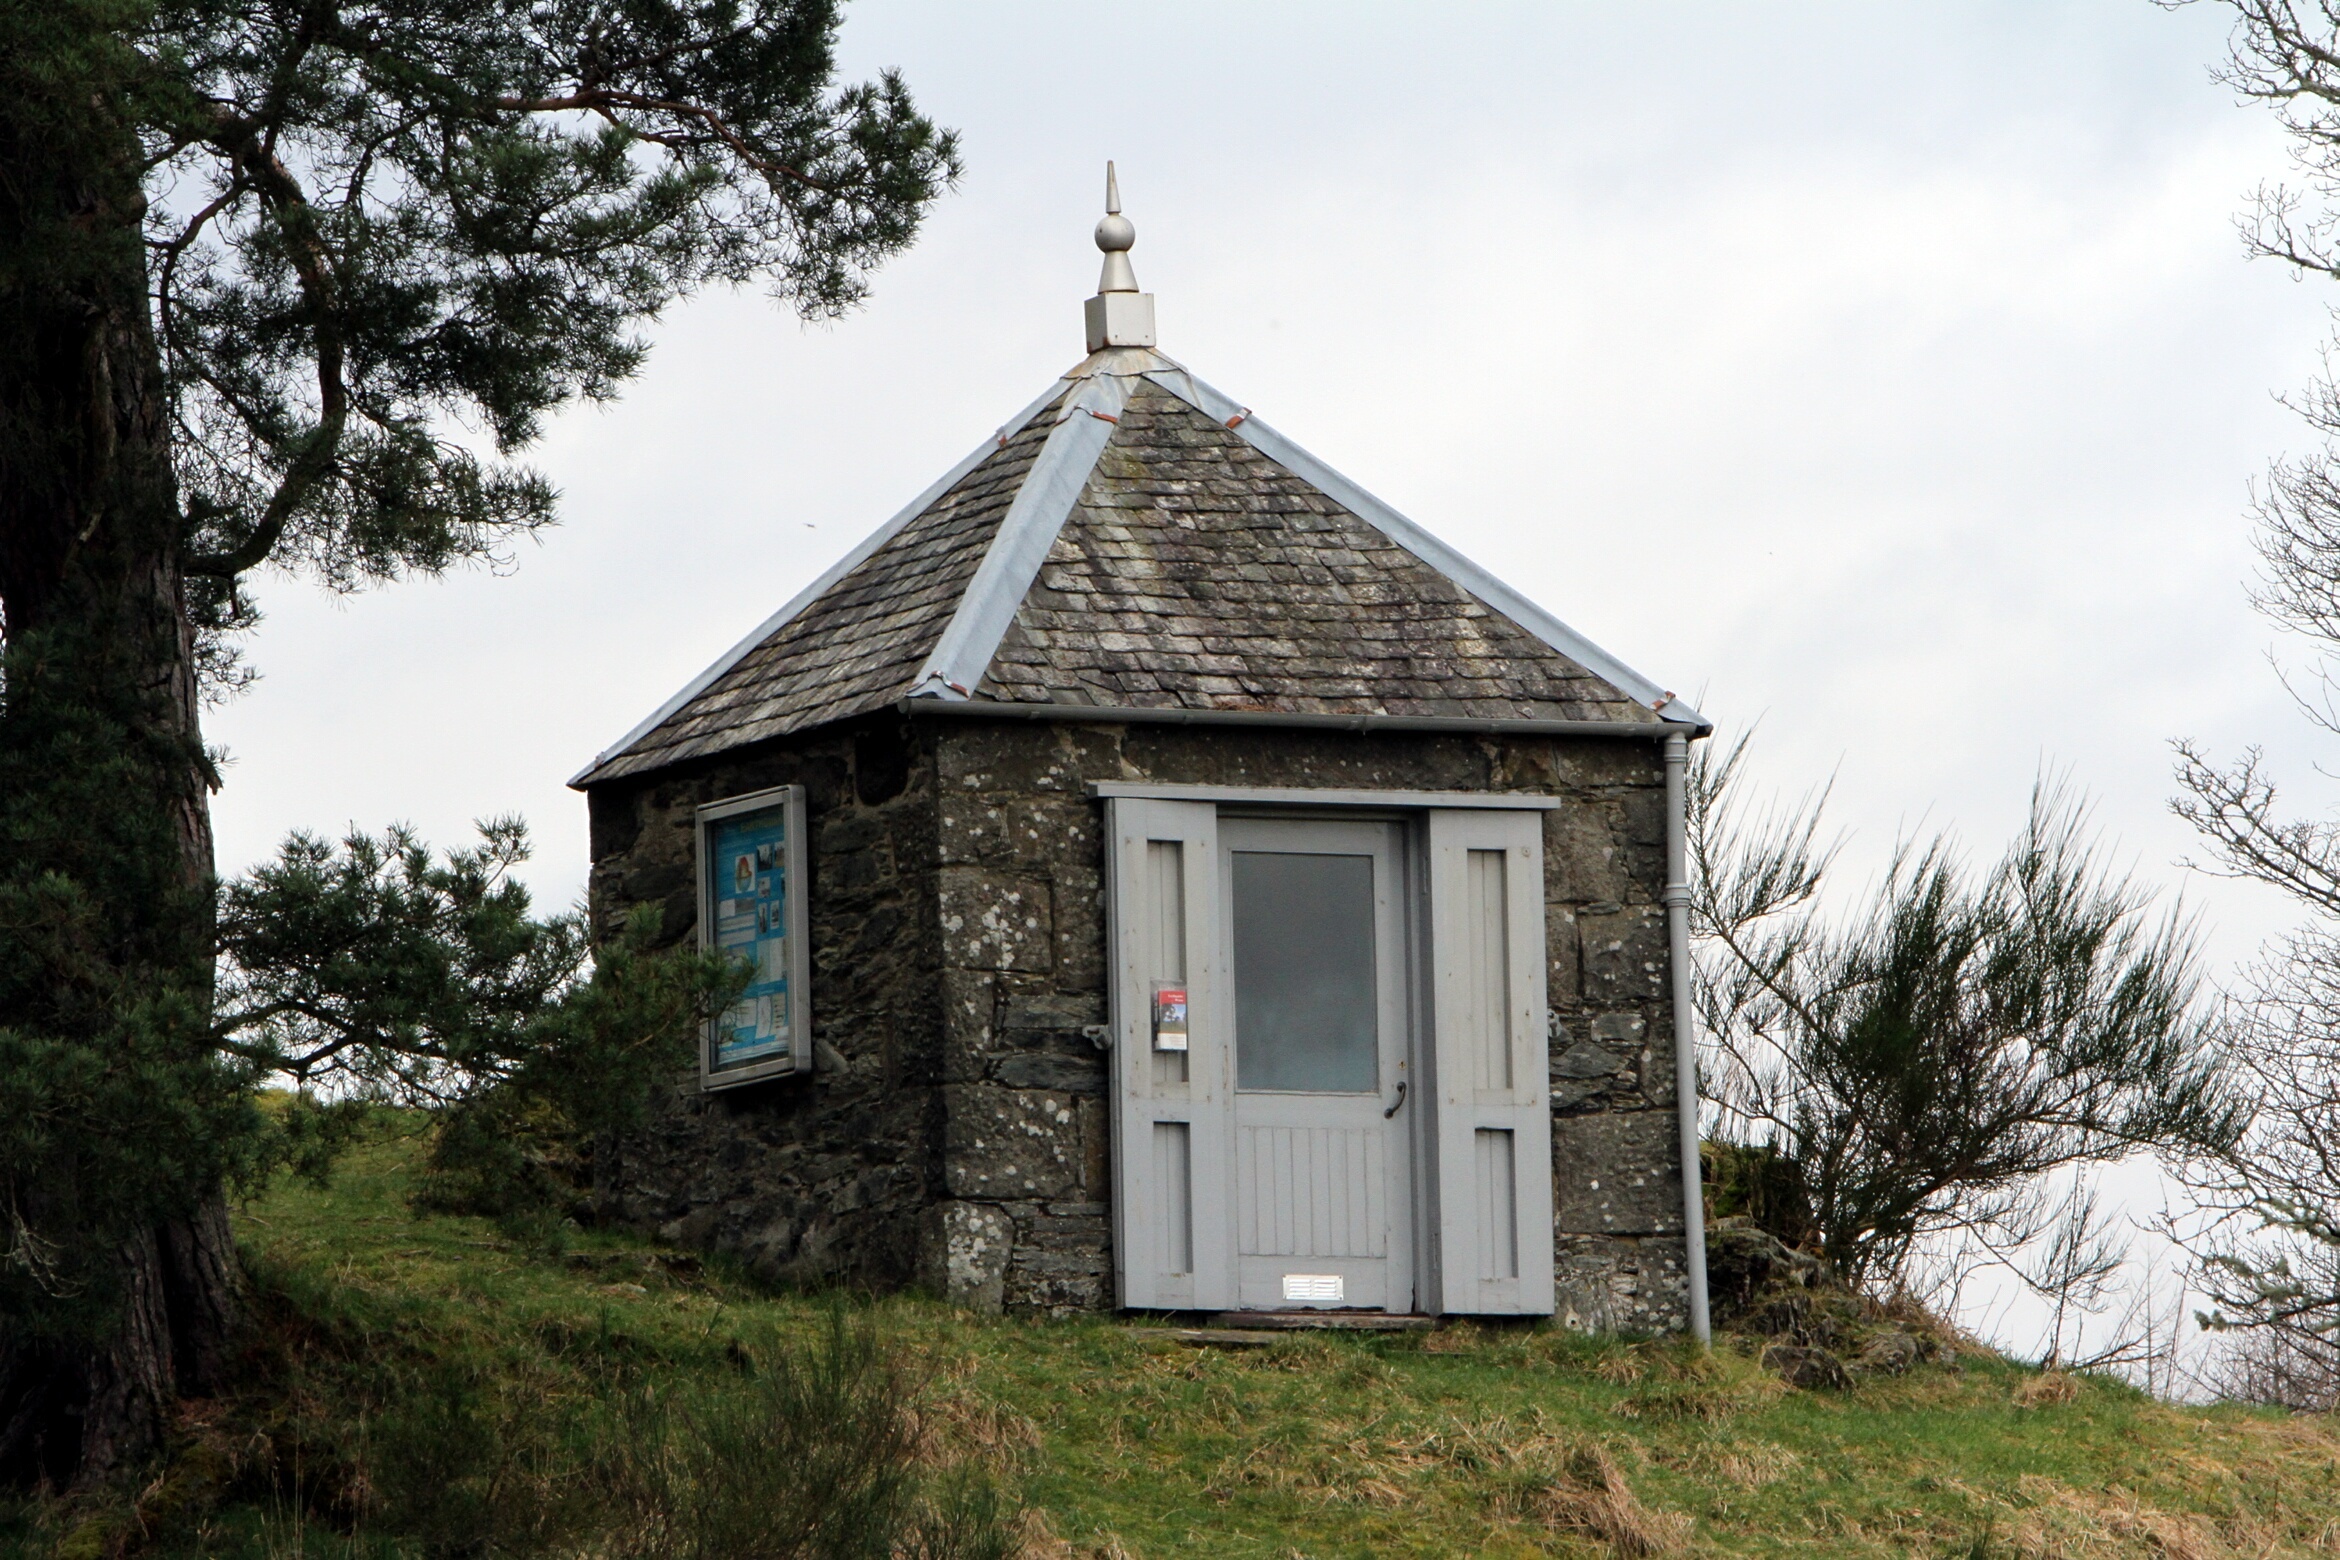 Earthquake House in Comrie was once a centre of seismology research.